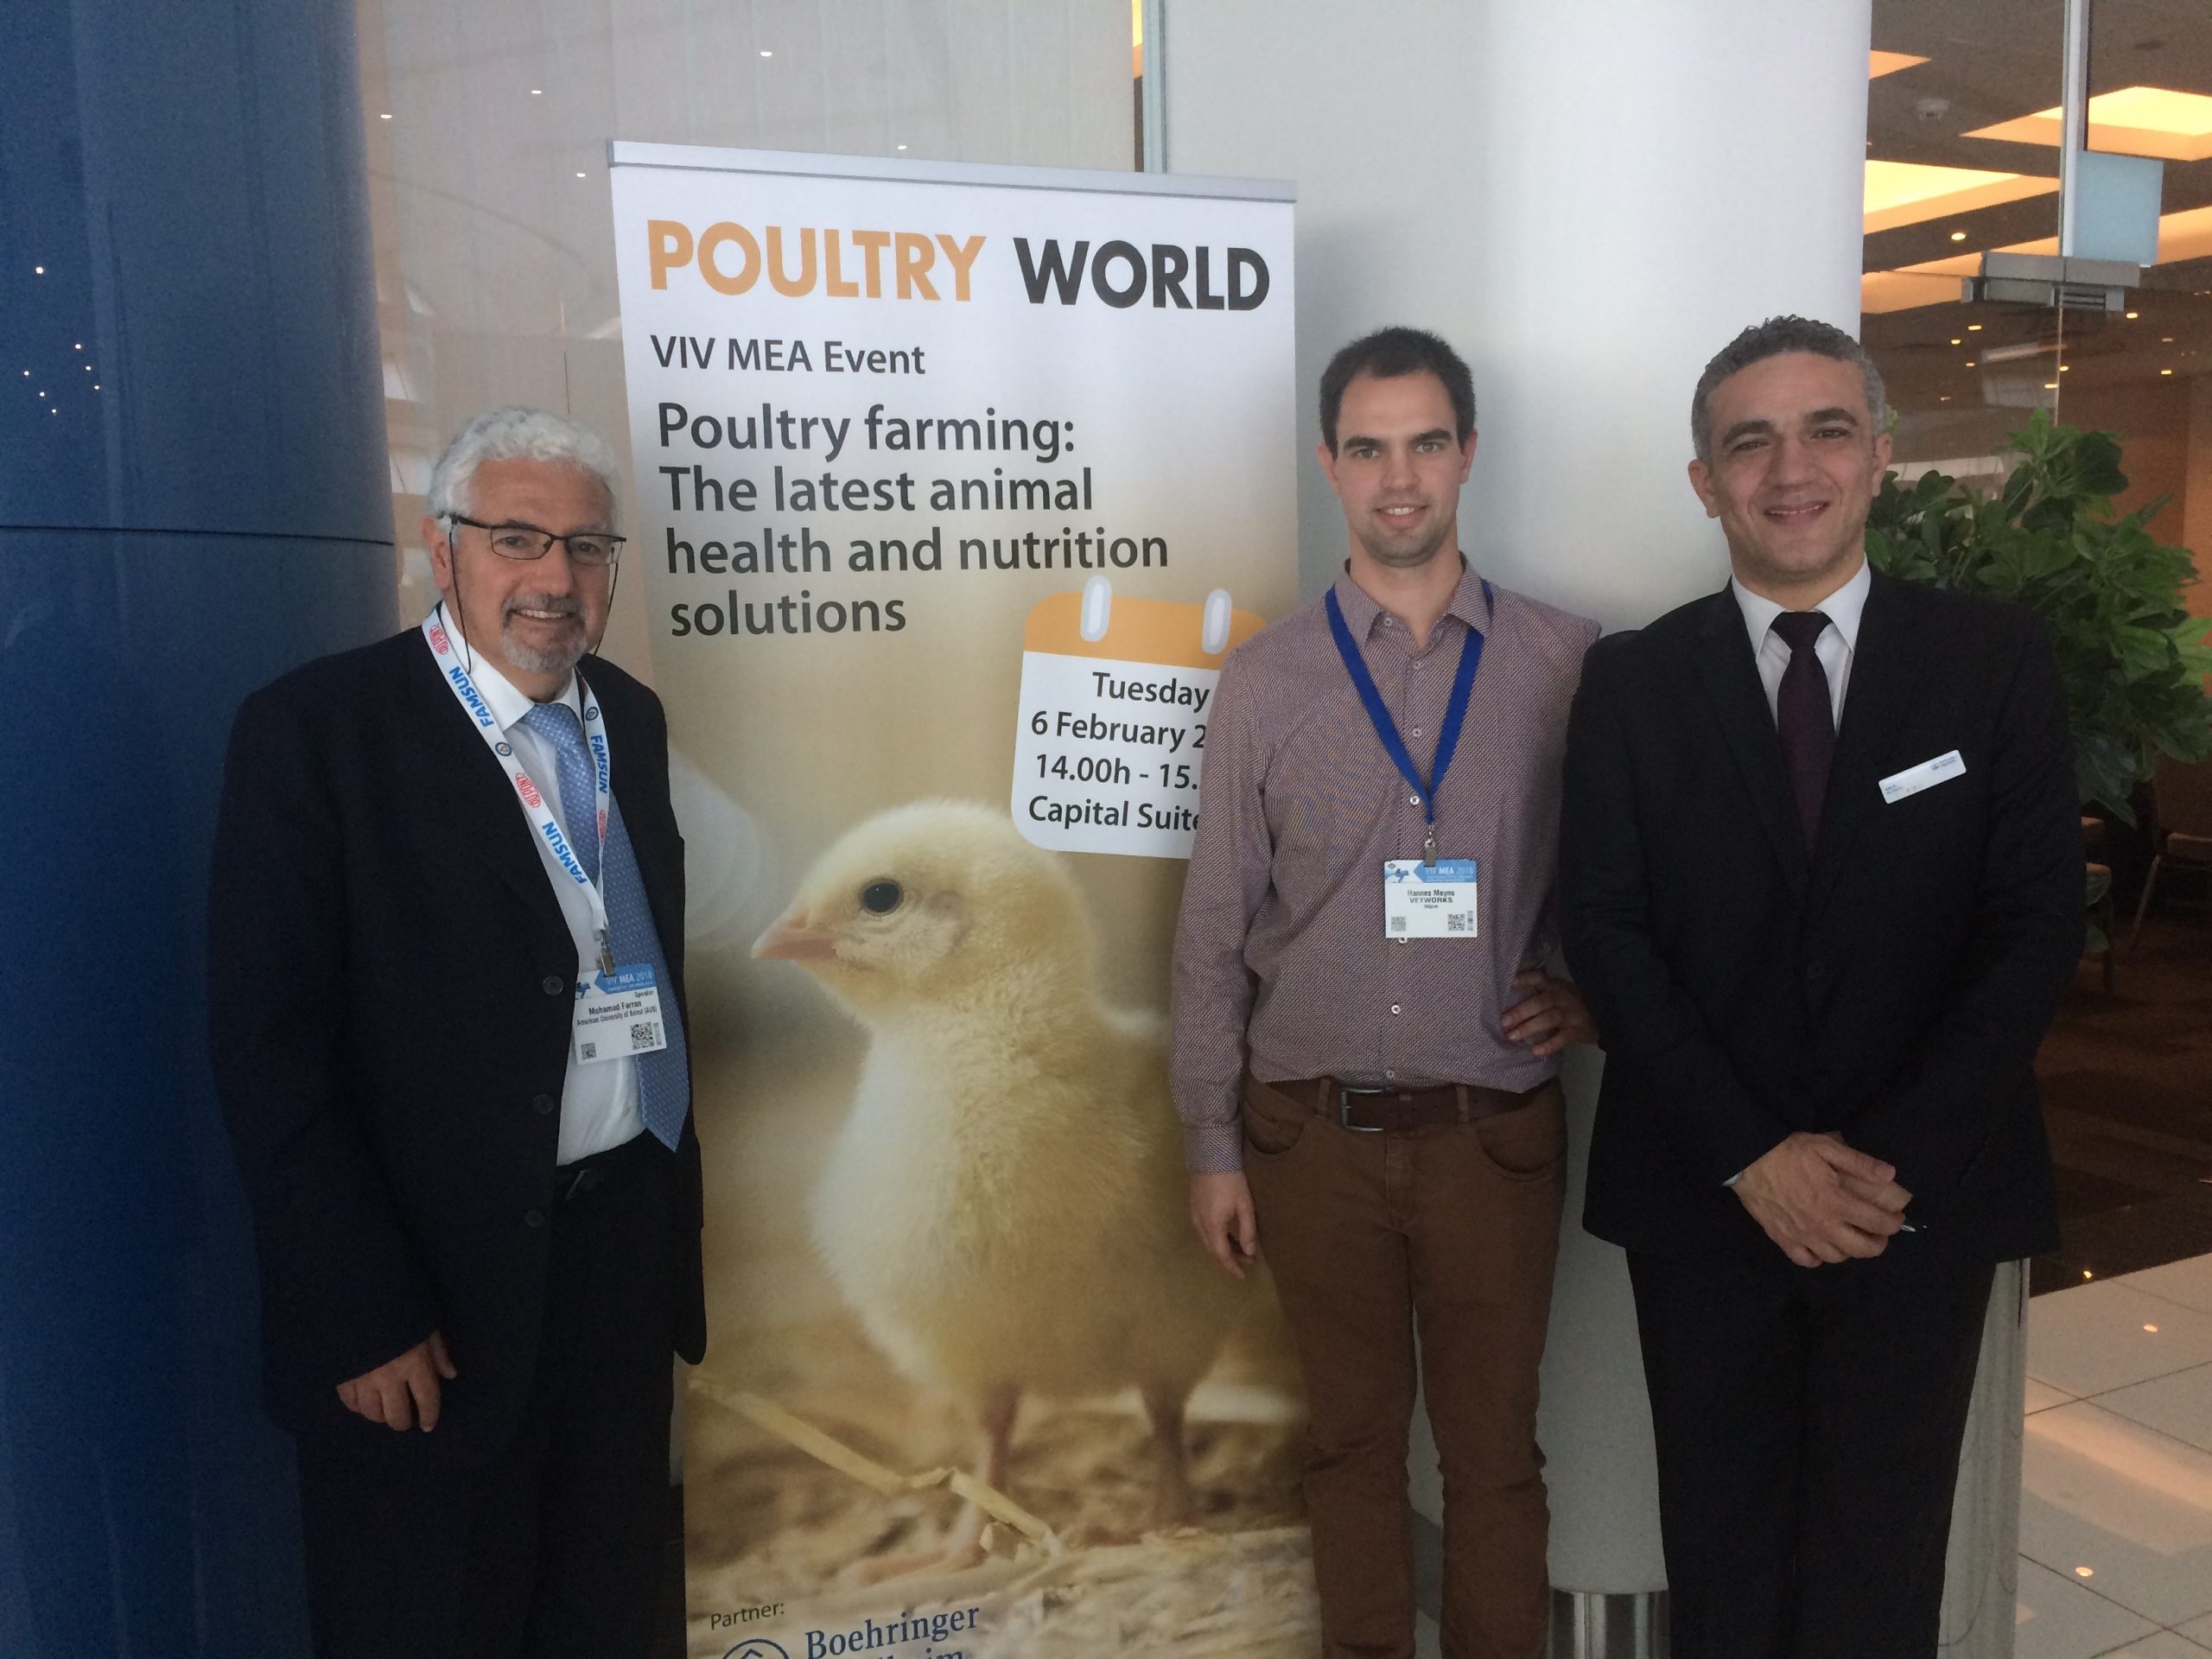 Full house at Poultry World event at VIV MEA. Photo: Emmy Koeleman